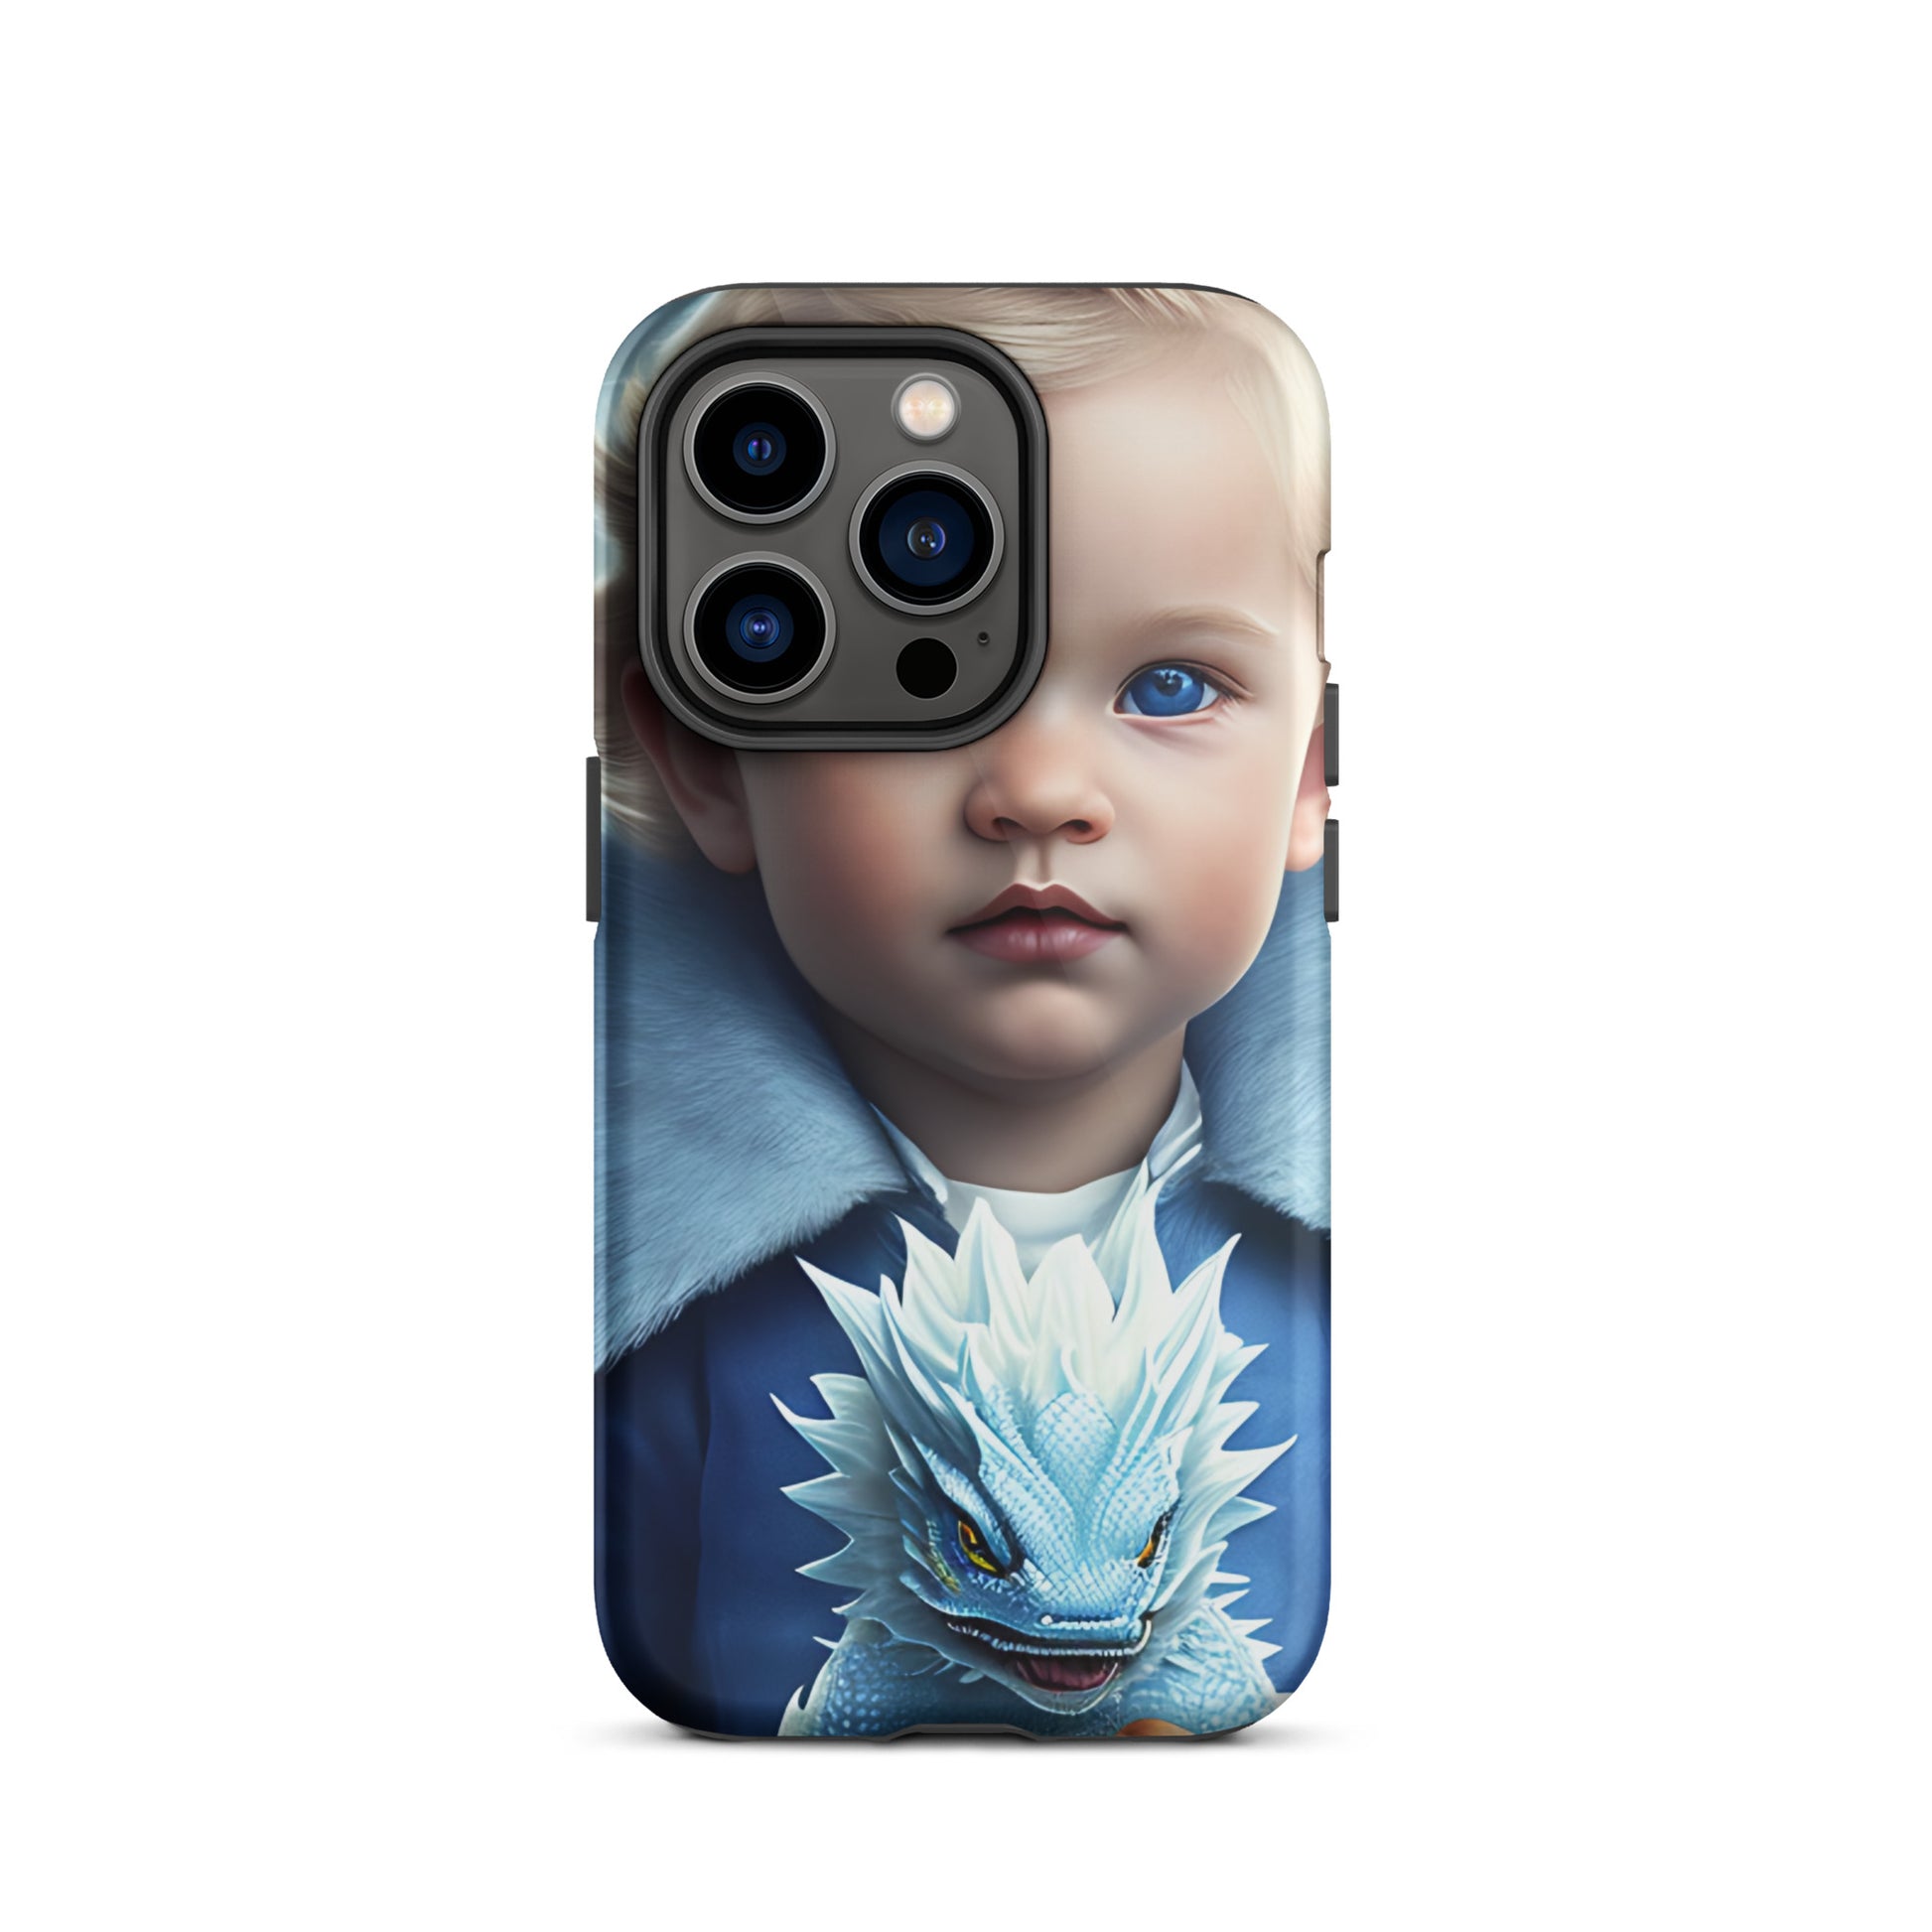 A picture of a an iphone case with a blond haired blue eyed boy, blue top holding a baby ice dragon in front - Dragon Prince #2 tough iphone case - glossy-iphone-14-pro-front